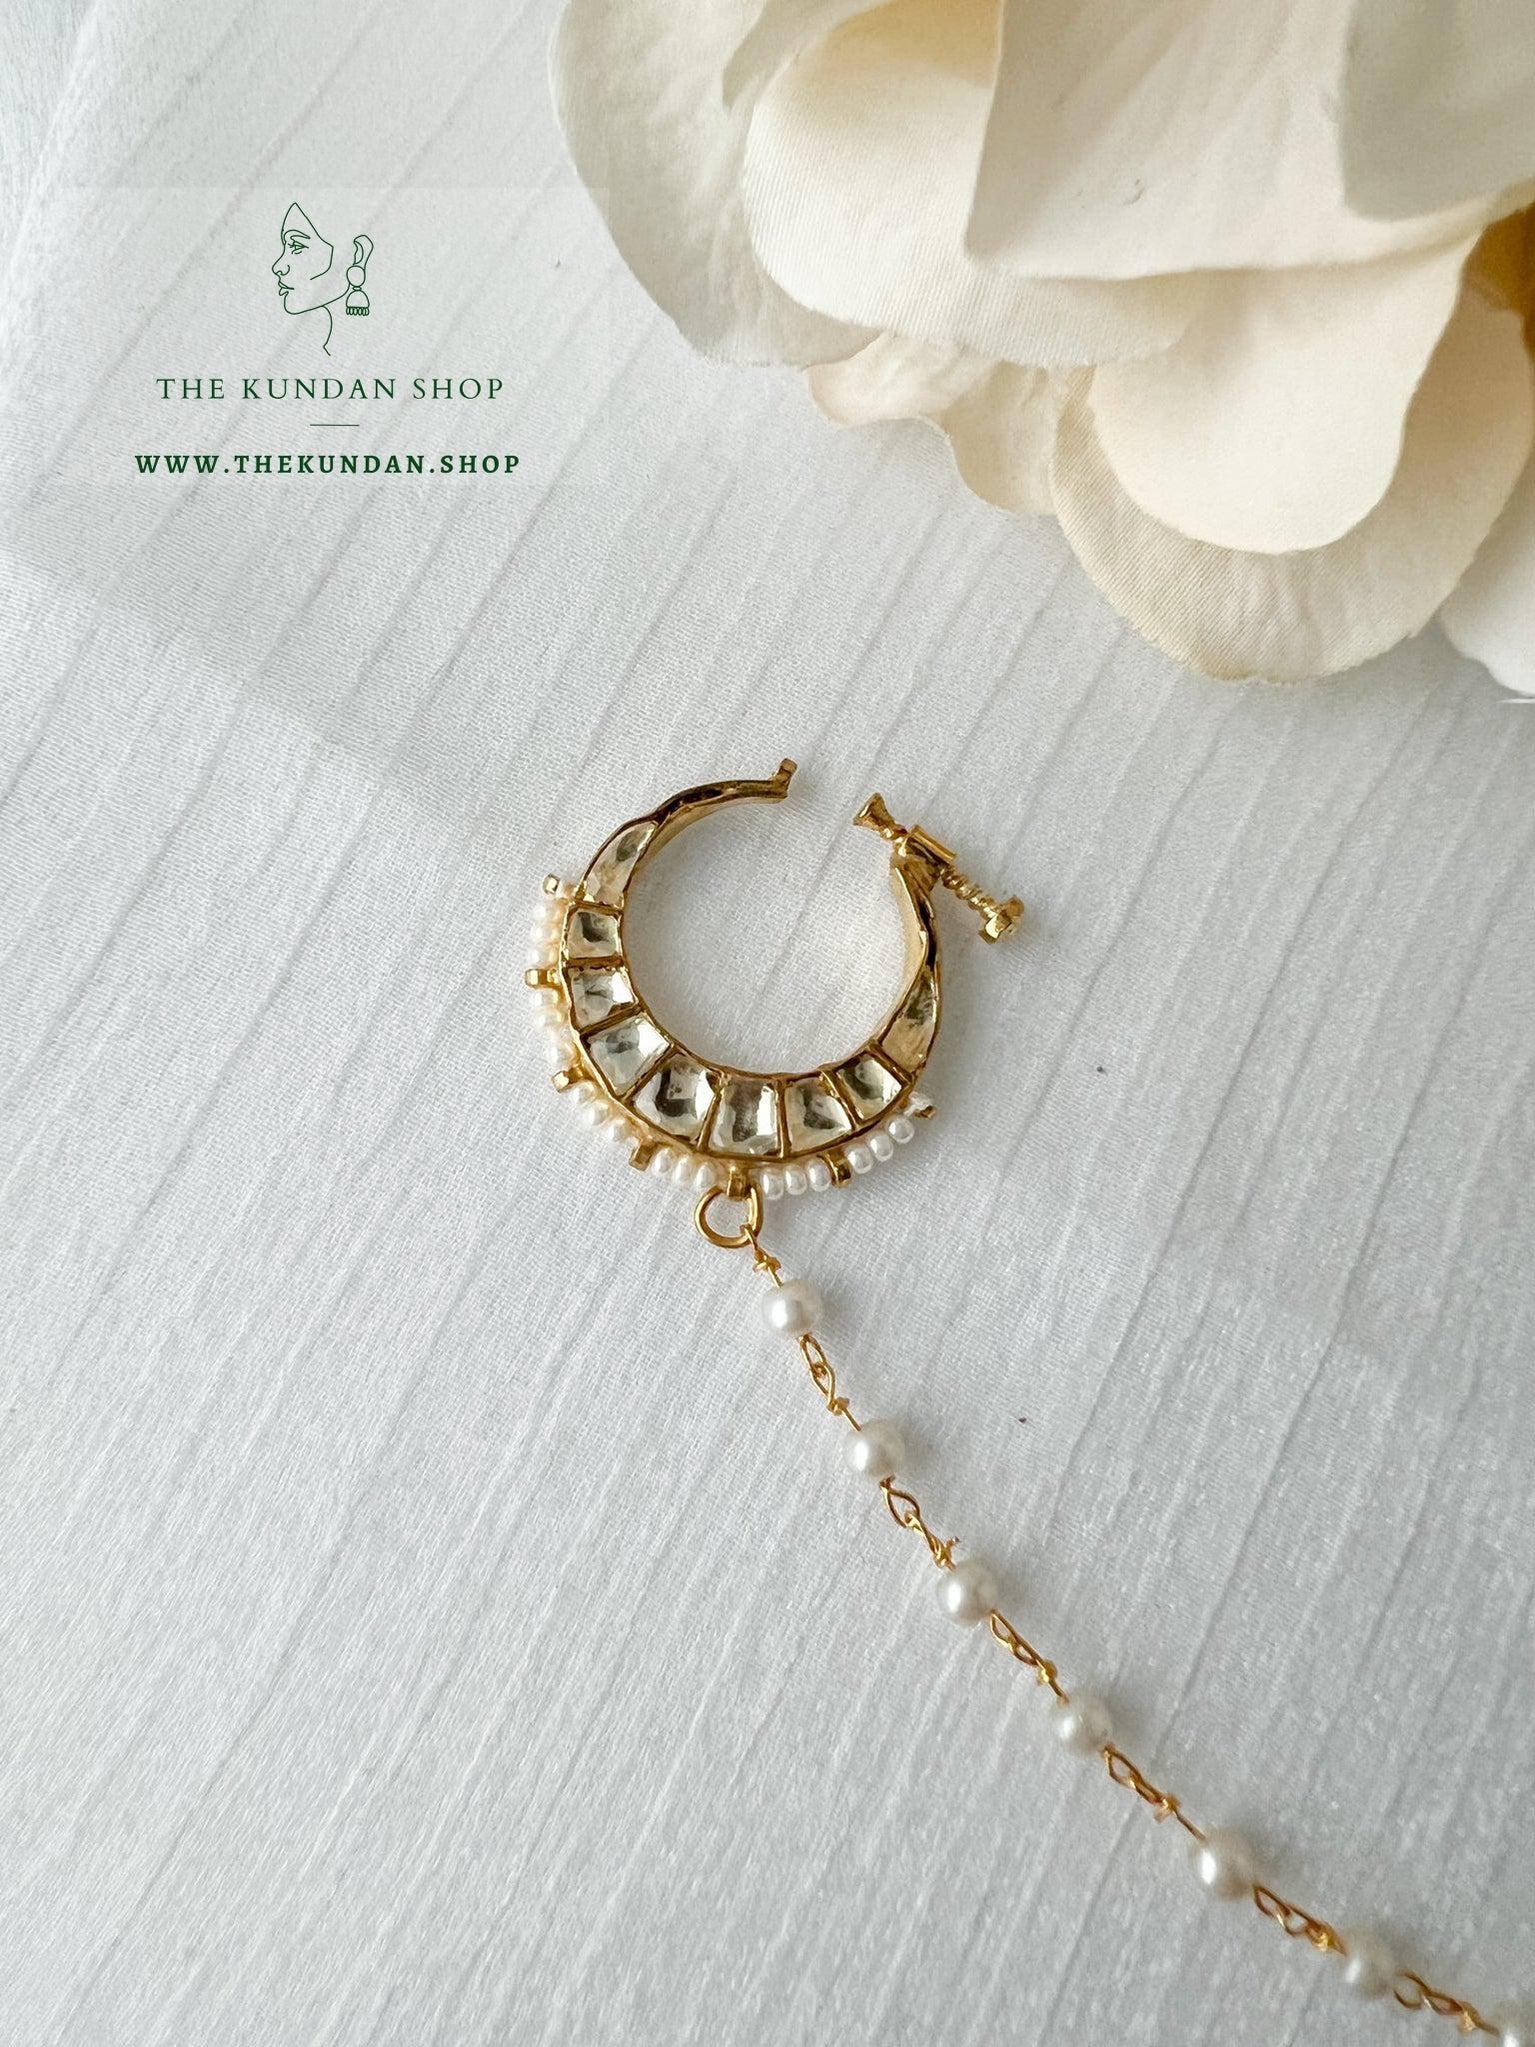 LARGE KUNDAN NOSE RING NATH | The Jewel Project